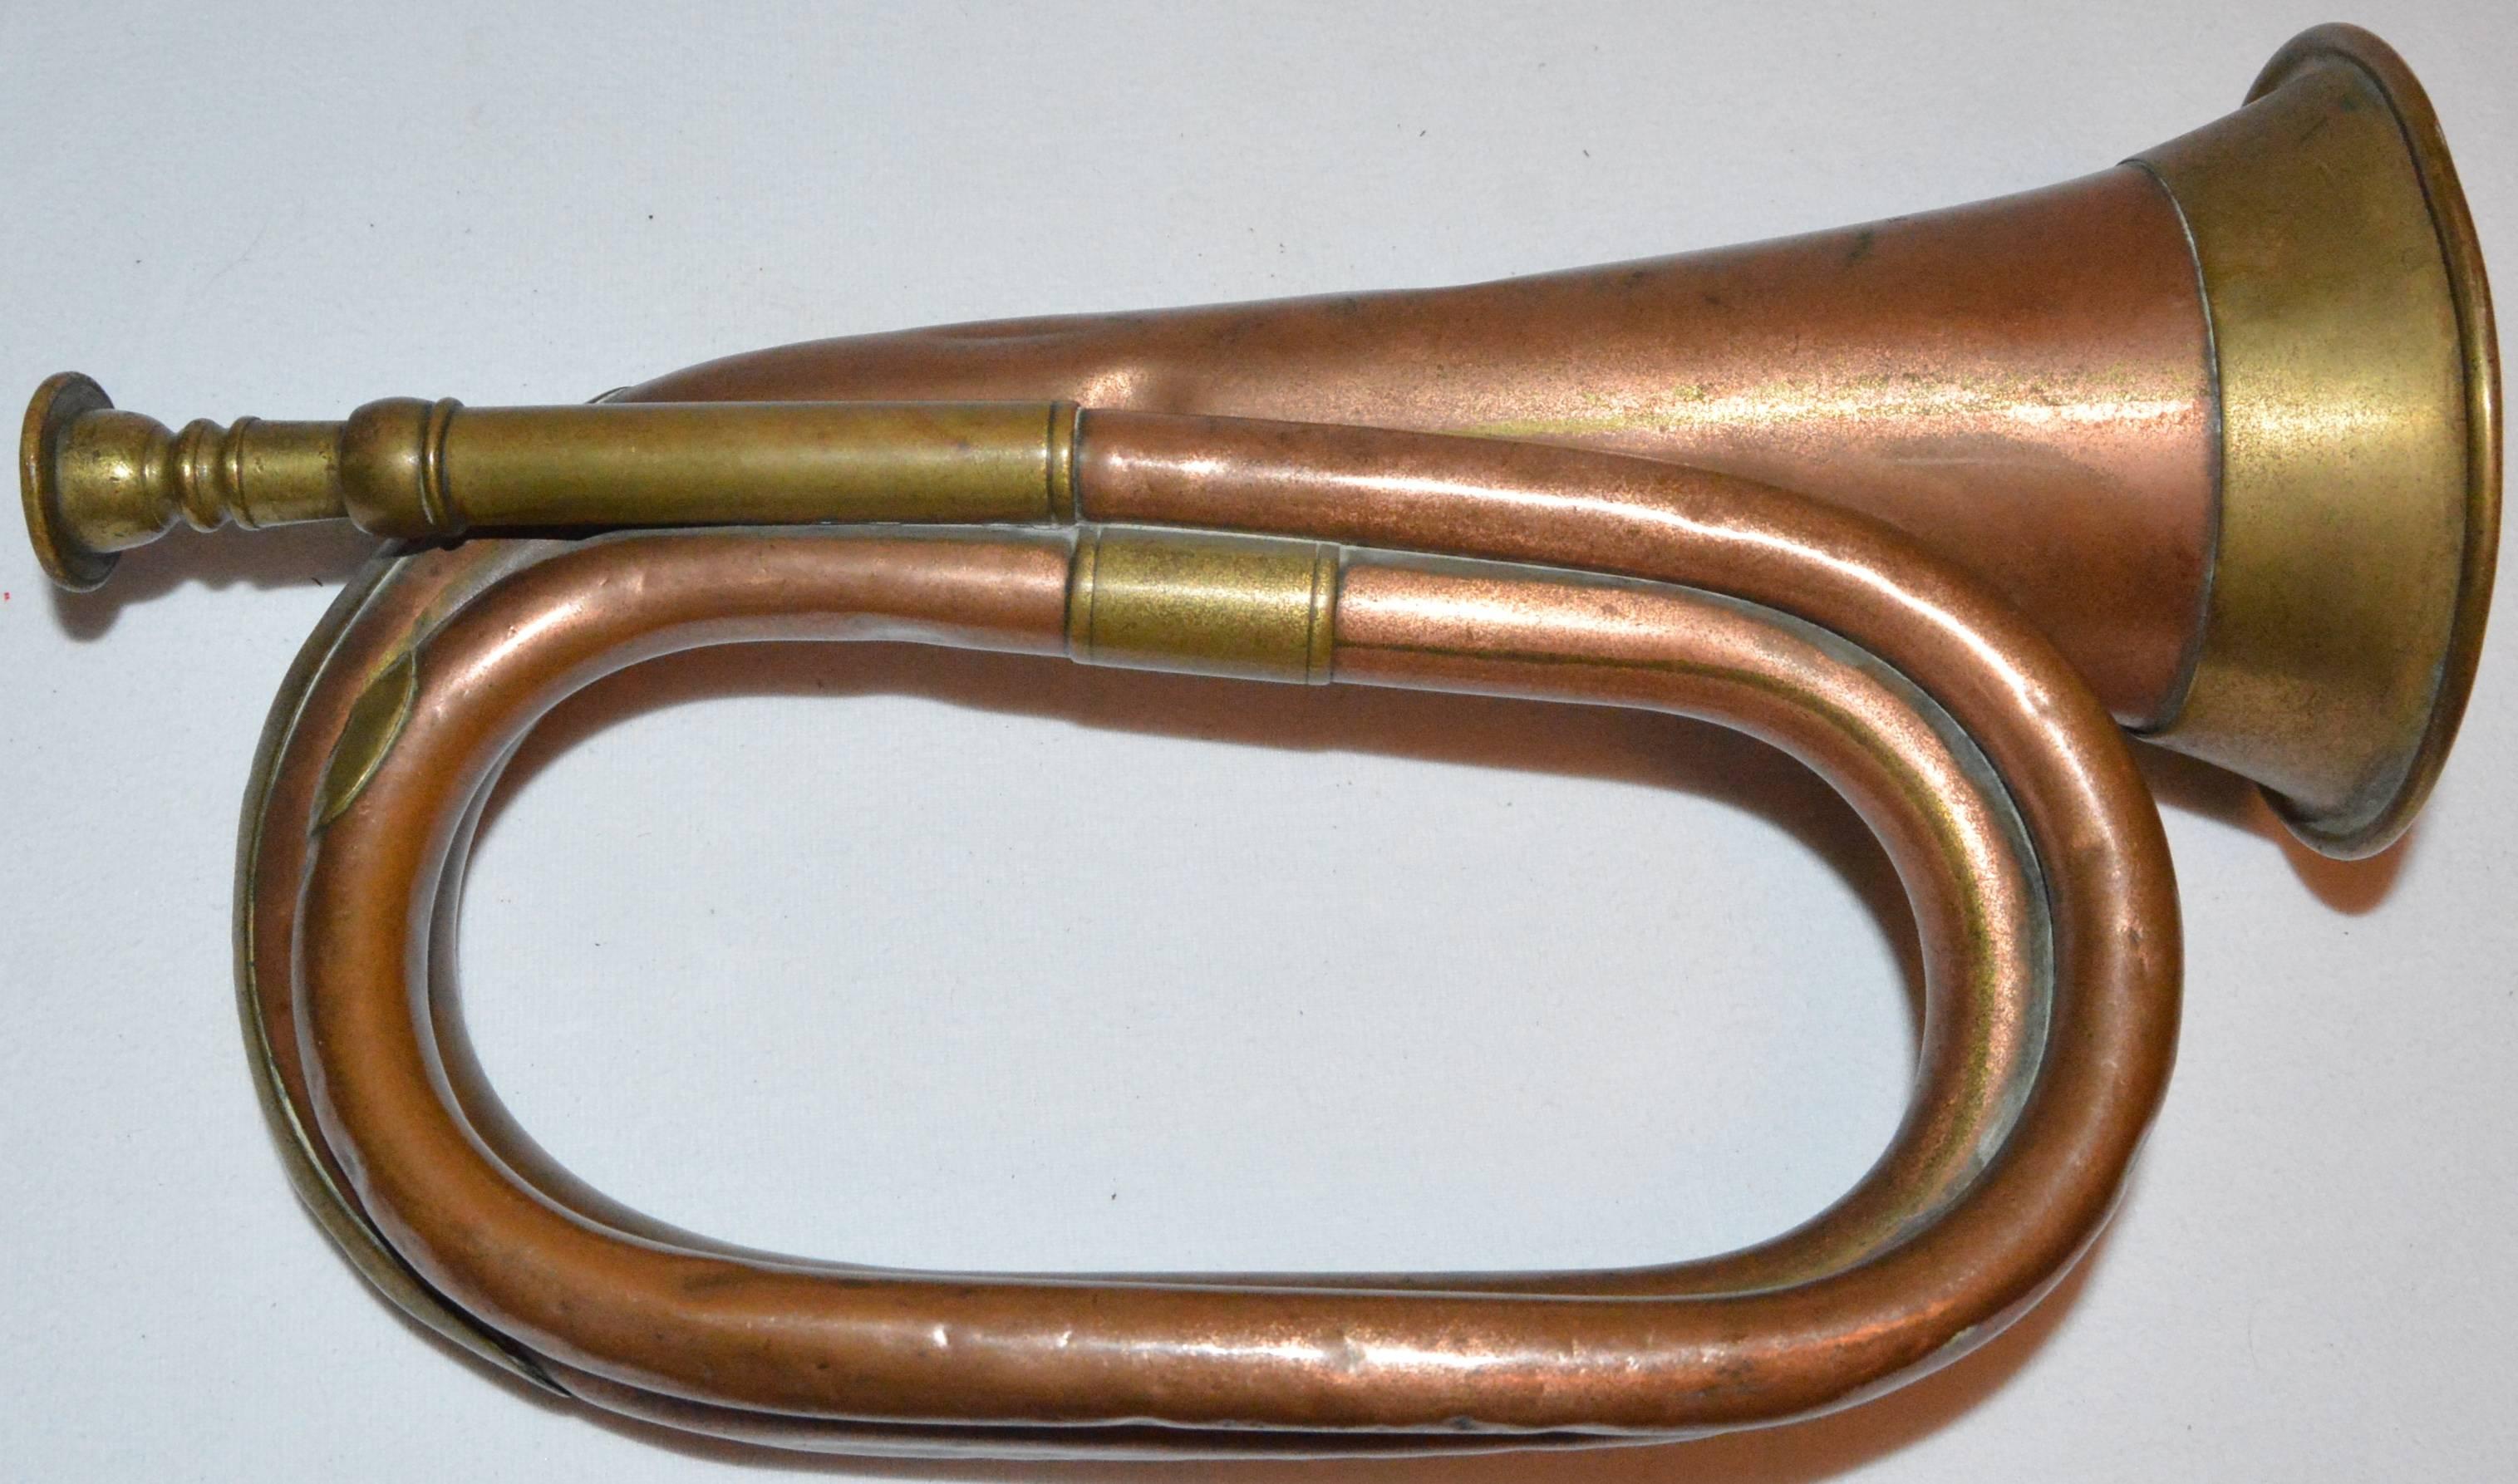 We are offering you a collectible copper and brass military bugle made by Henry Potter & Co., London, England. The bugle is a number “2” and is stamped on the bell with information about the maker and a date, 1941. Henry Potter & Co. was established